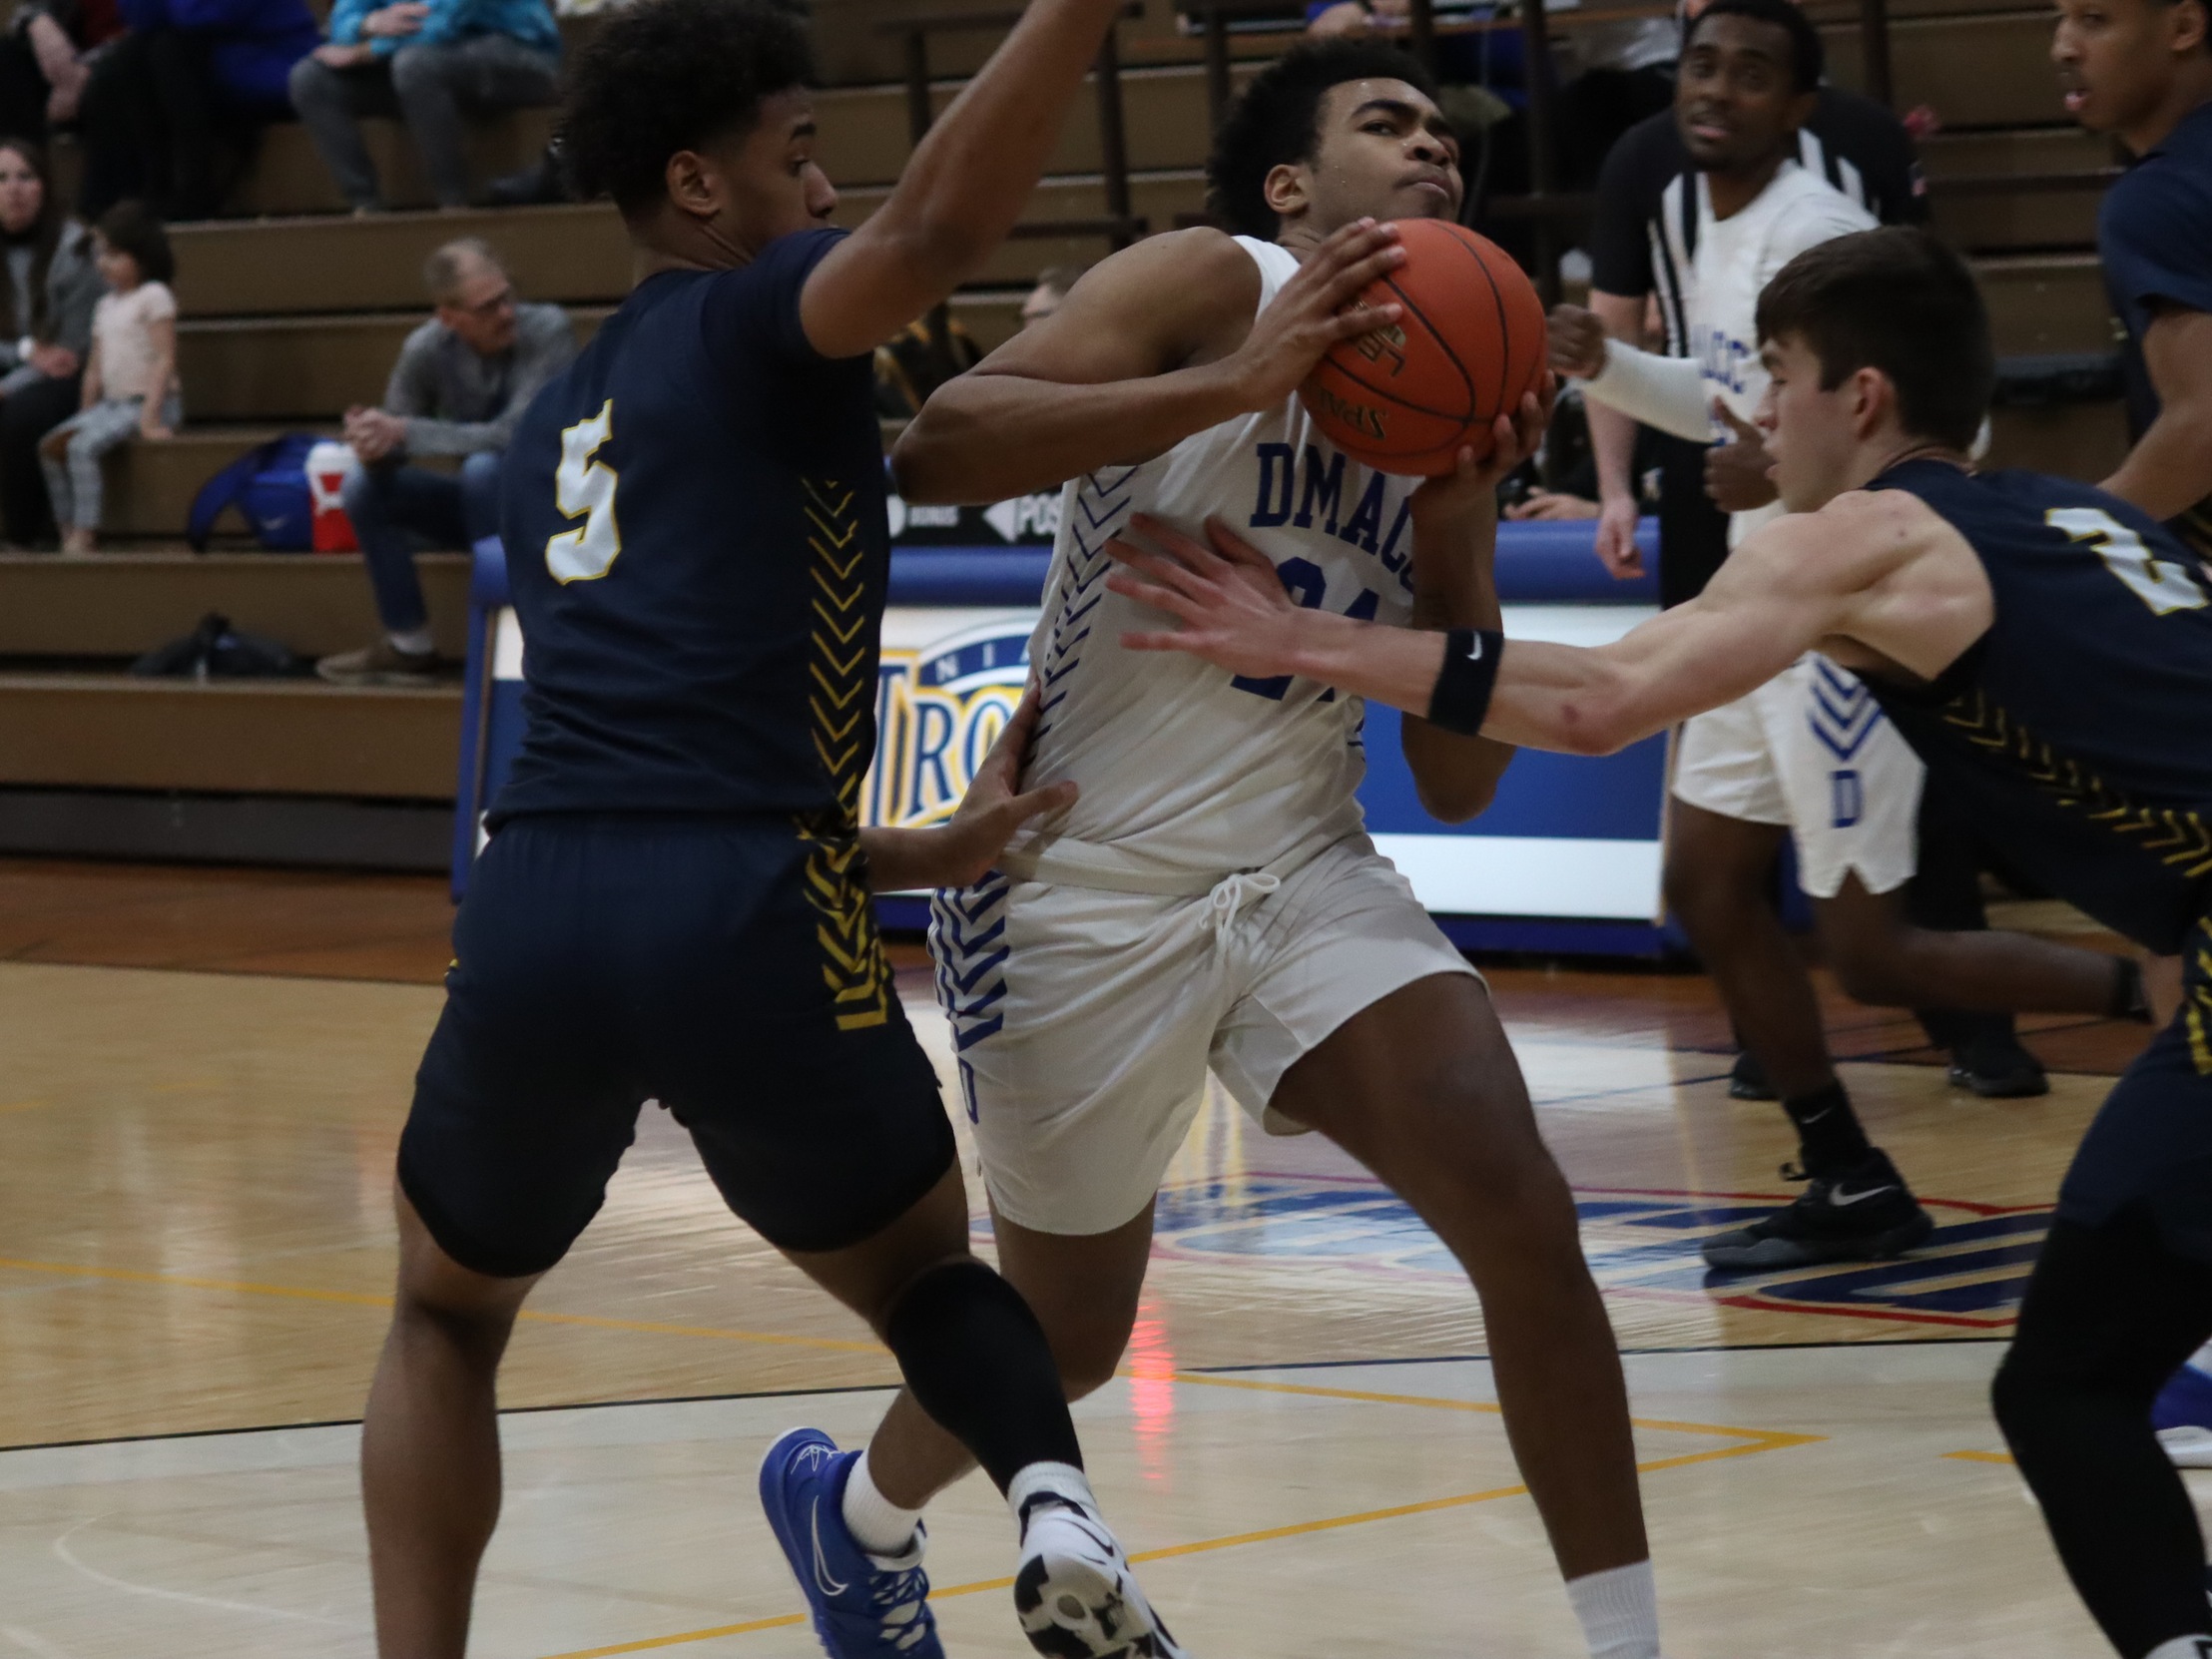 DMACC men's basketball team advances to Region XI championship game with wins over ECC and ILCC